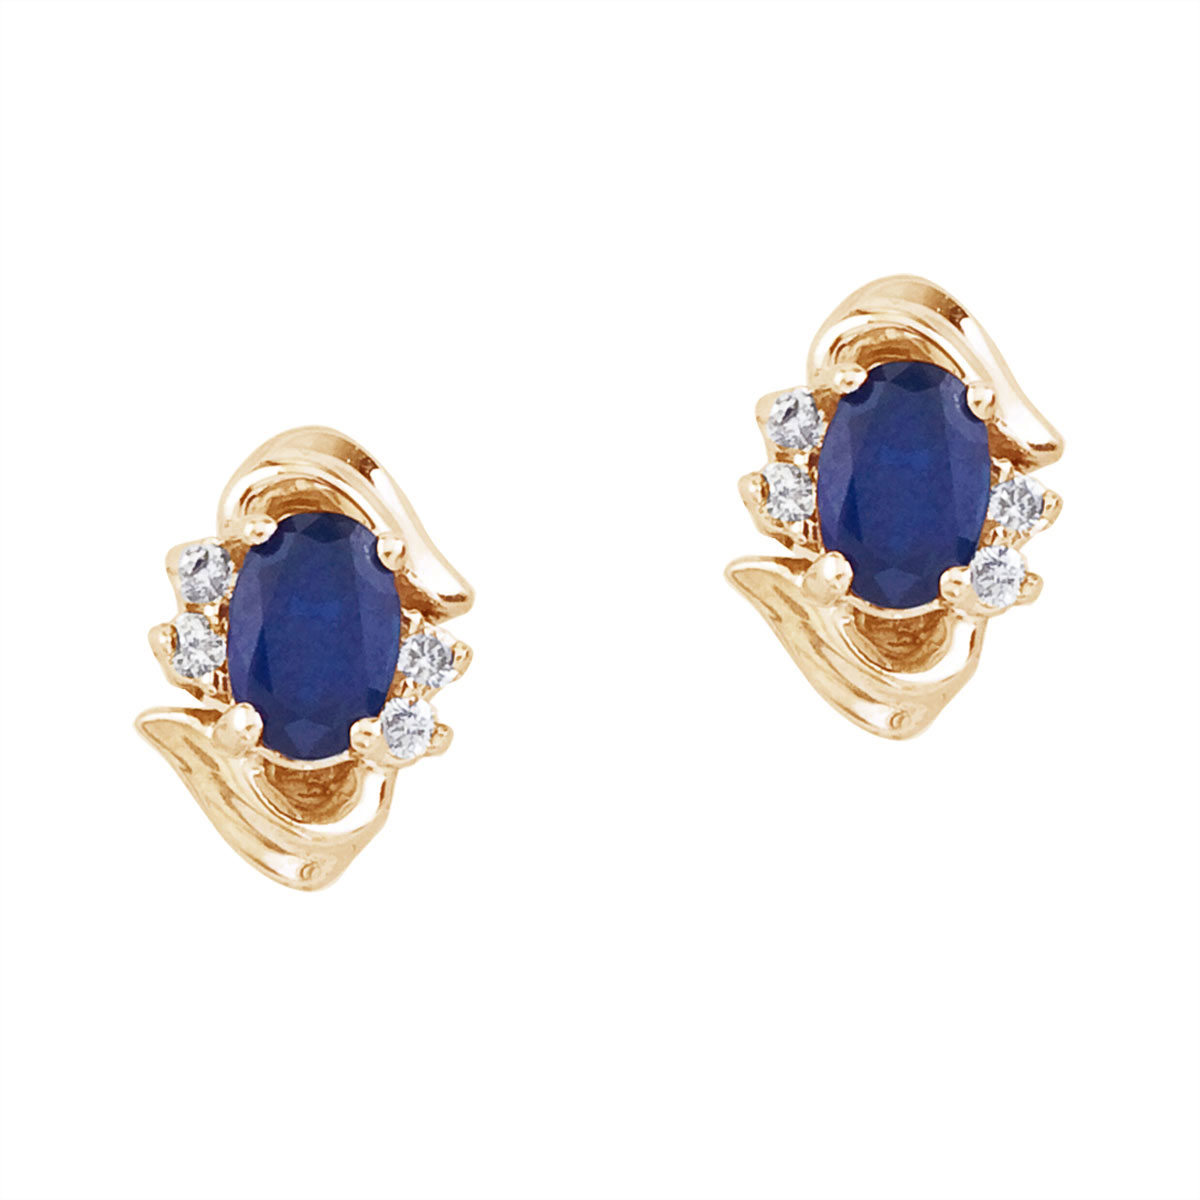 JCX2310: Stunning 14k yellow gold and sapphire earrings. Featuring natural 6x4 mm oval saphires and .11 total carat diamonds.